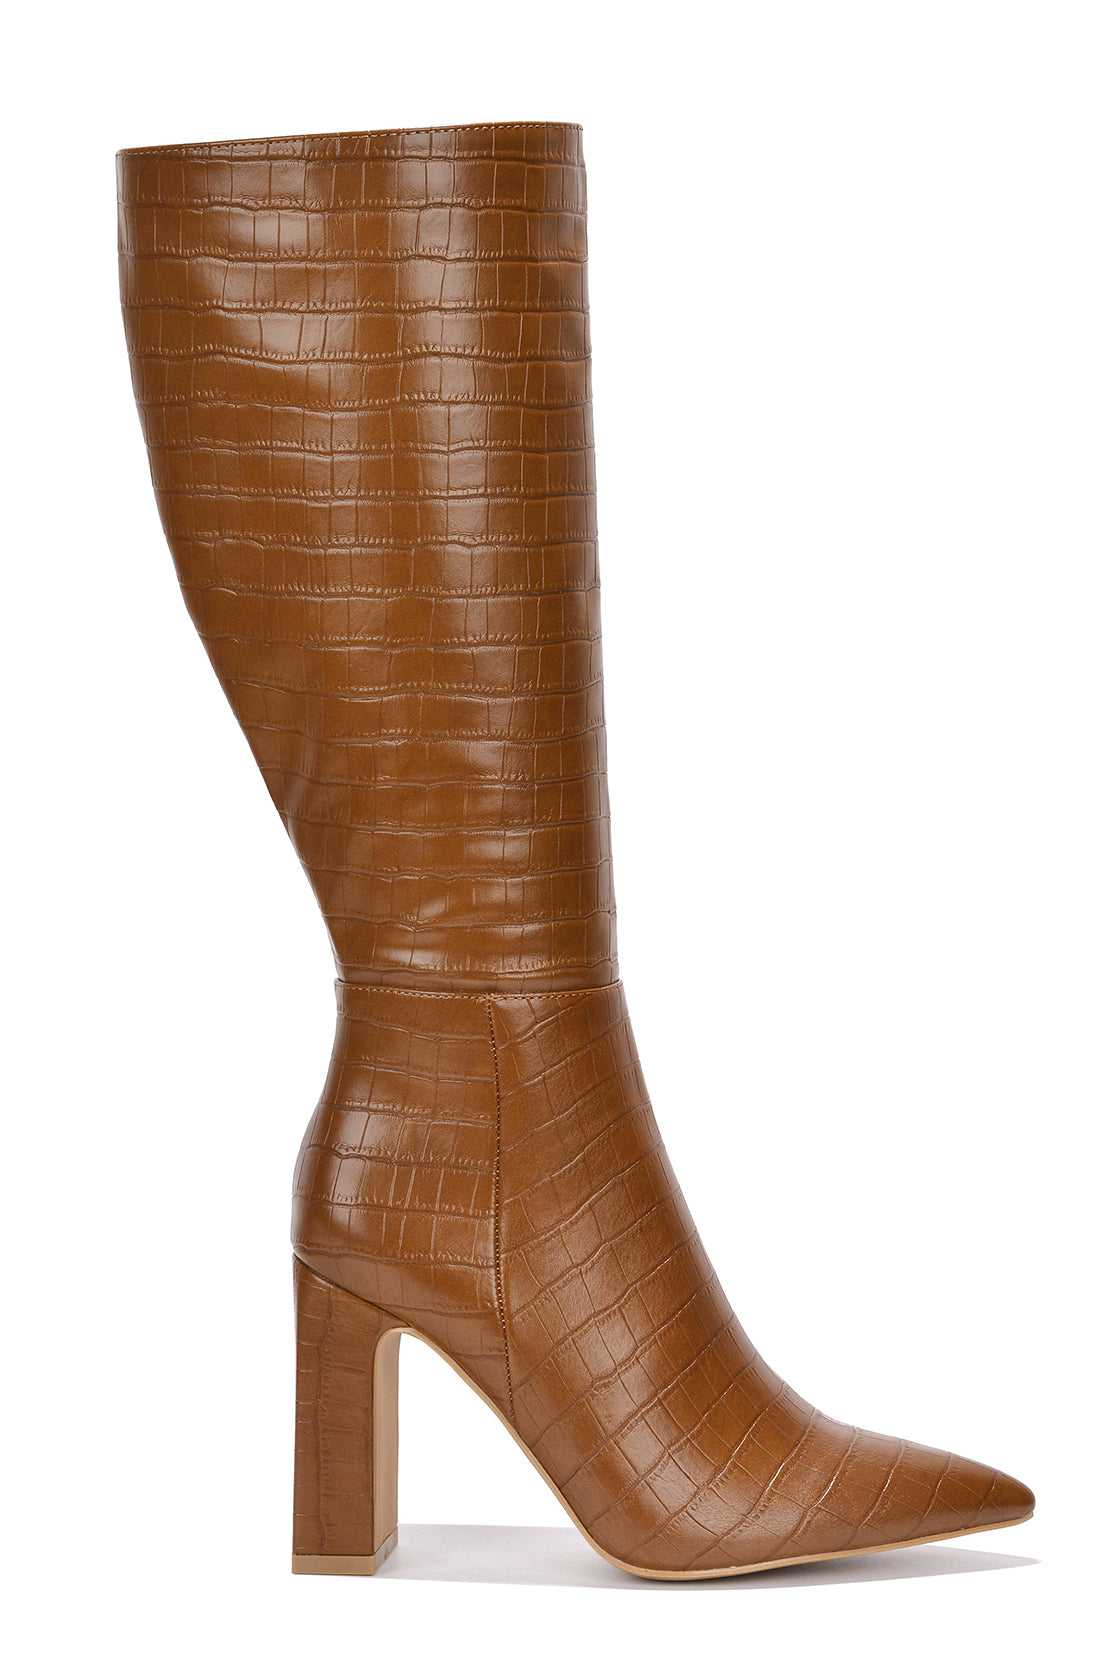 Cape Robbin - SAYWHAT-2 - BROWN - BOOTS